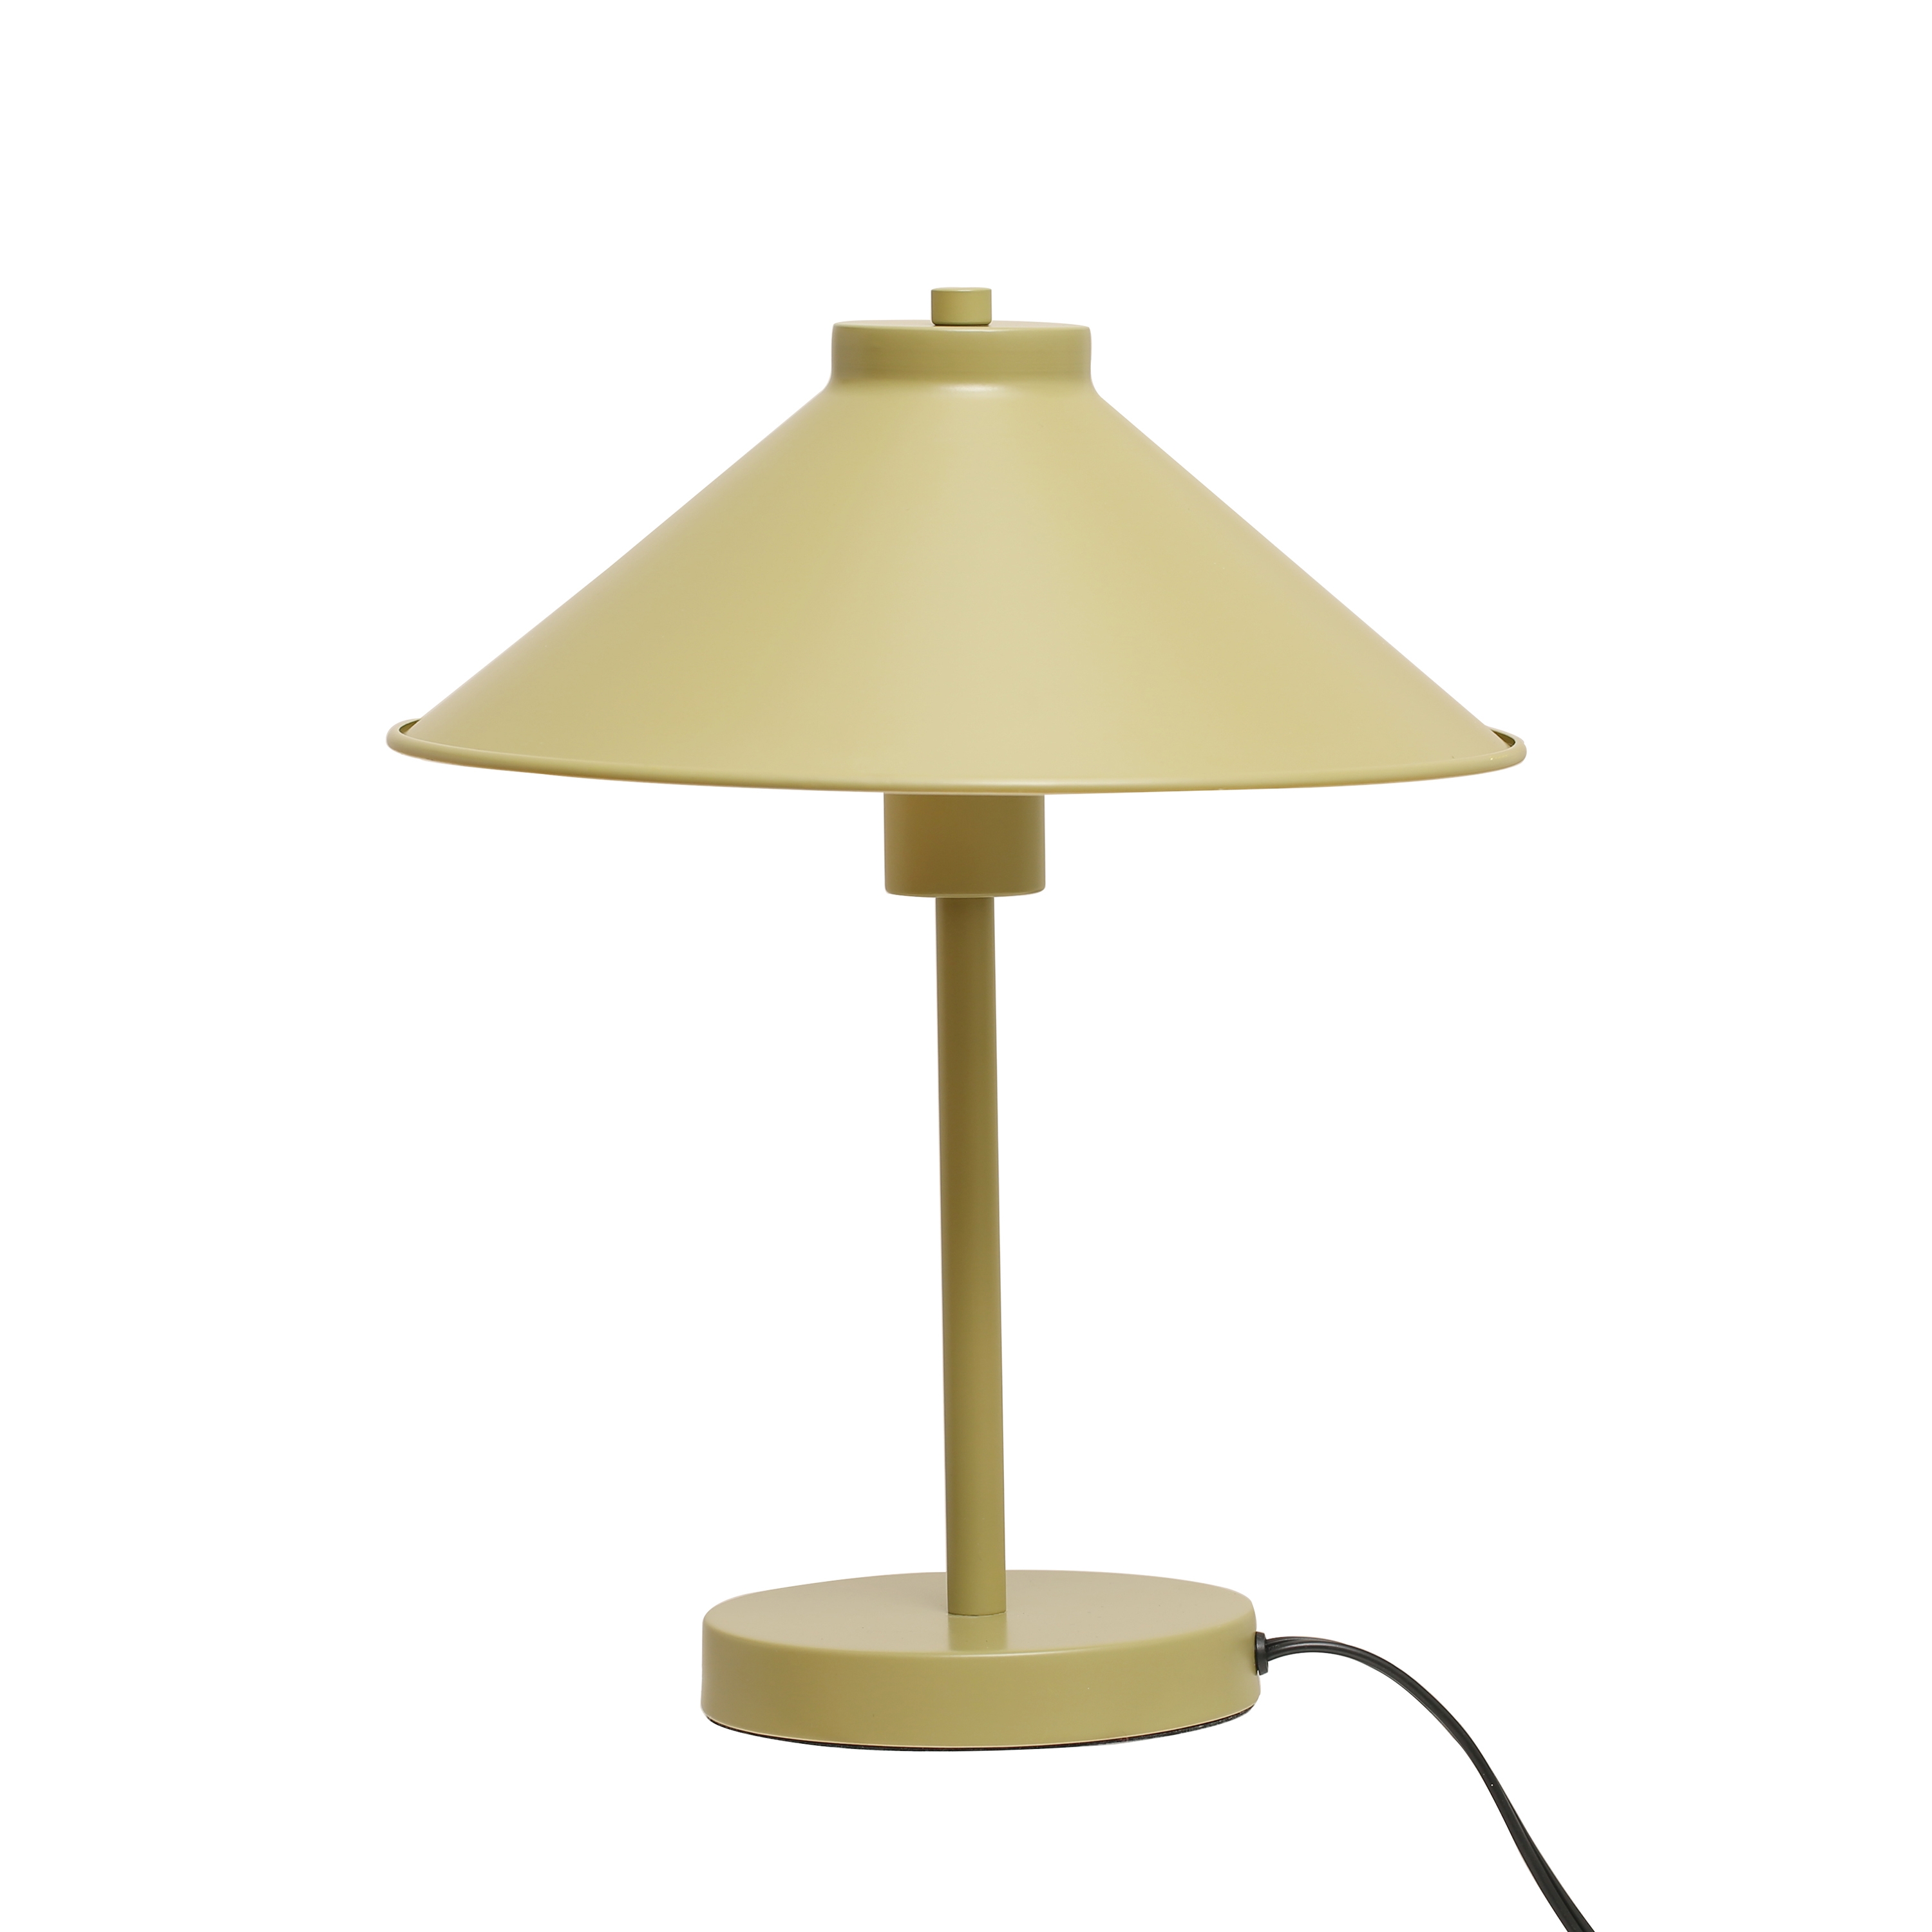 12" Round Metal Table Lamp with Inline Switch for 25 Watt Bulbs Maximum, Chartreuse - Image 0